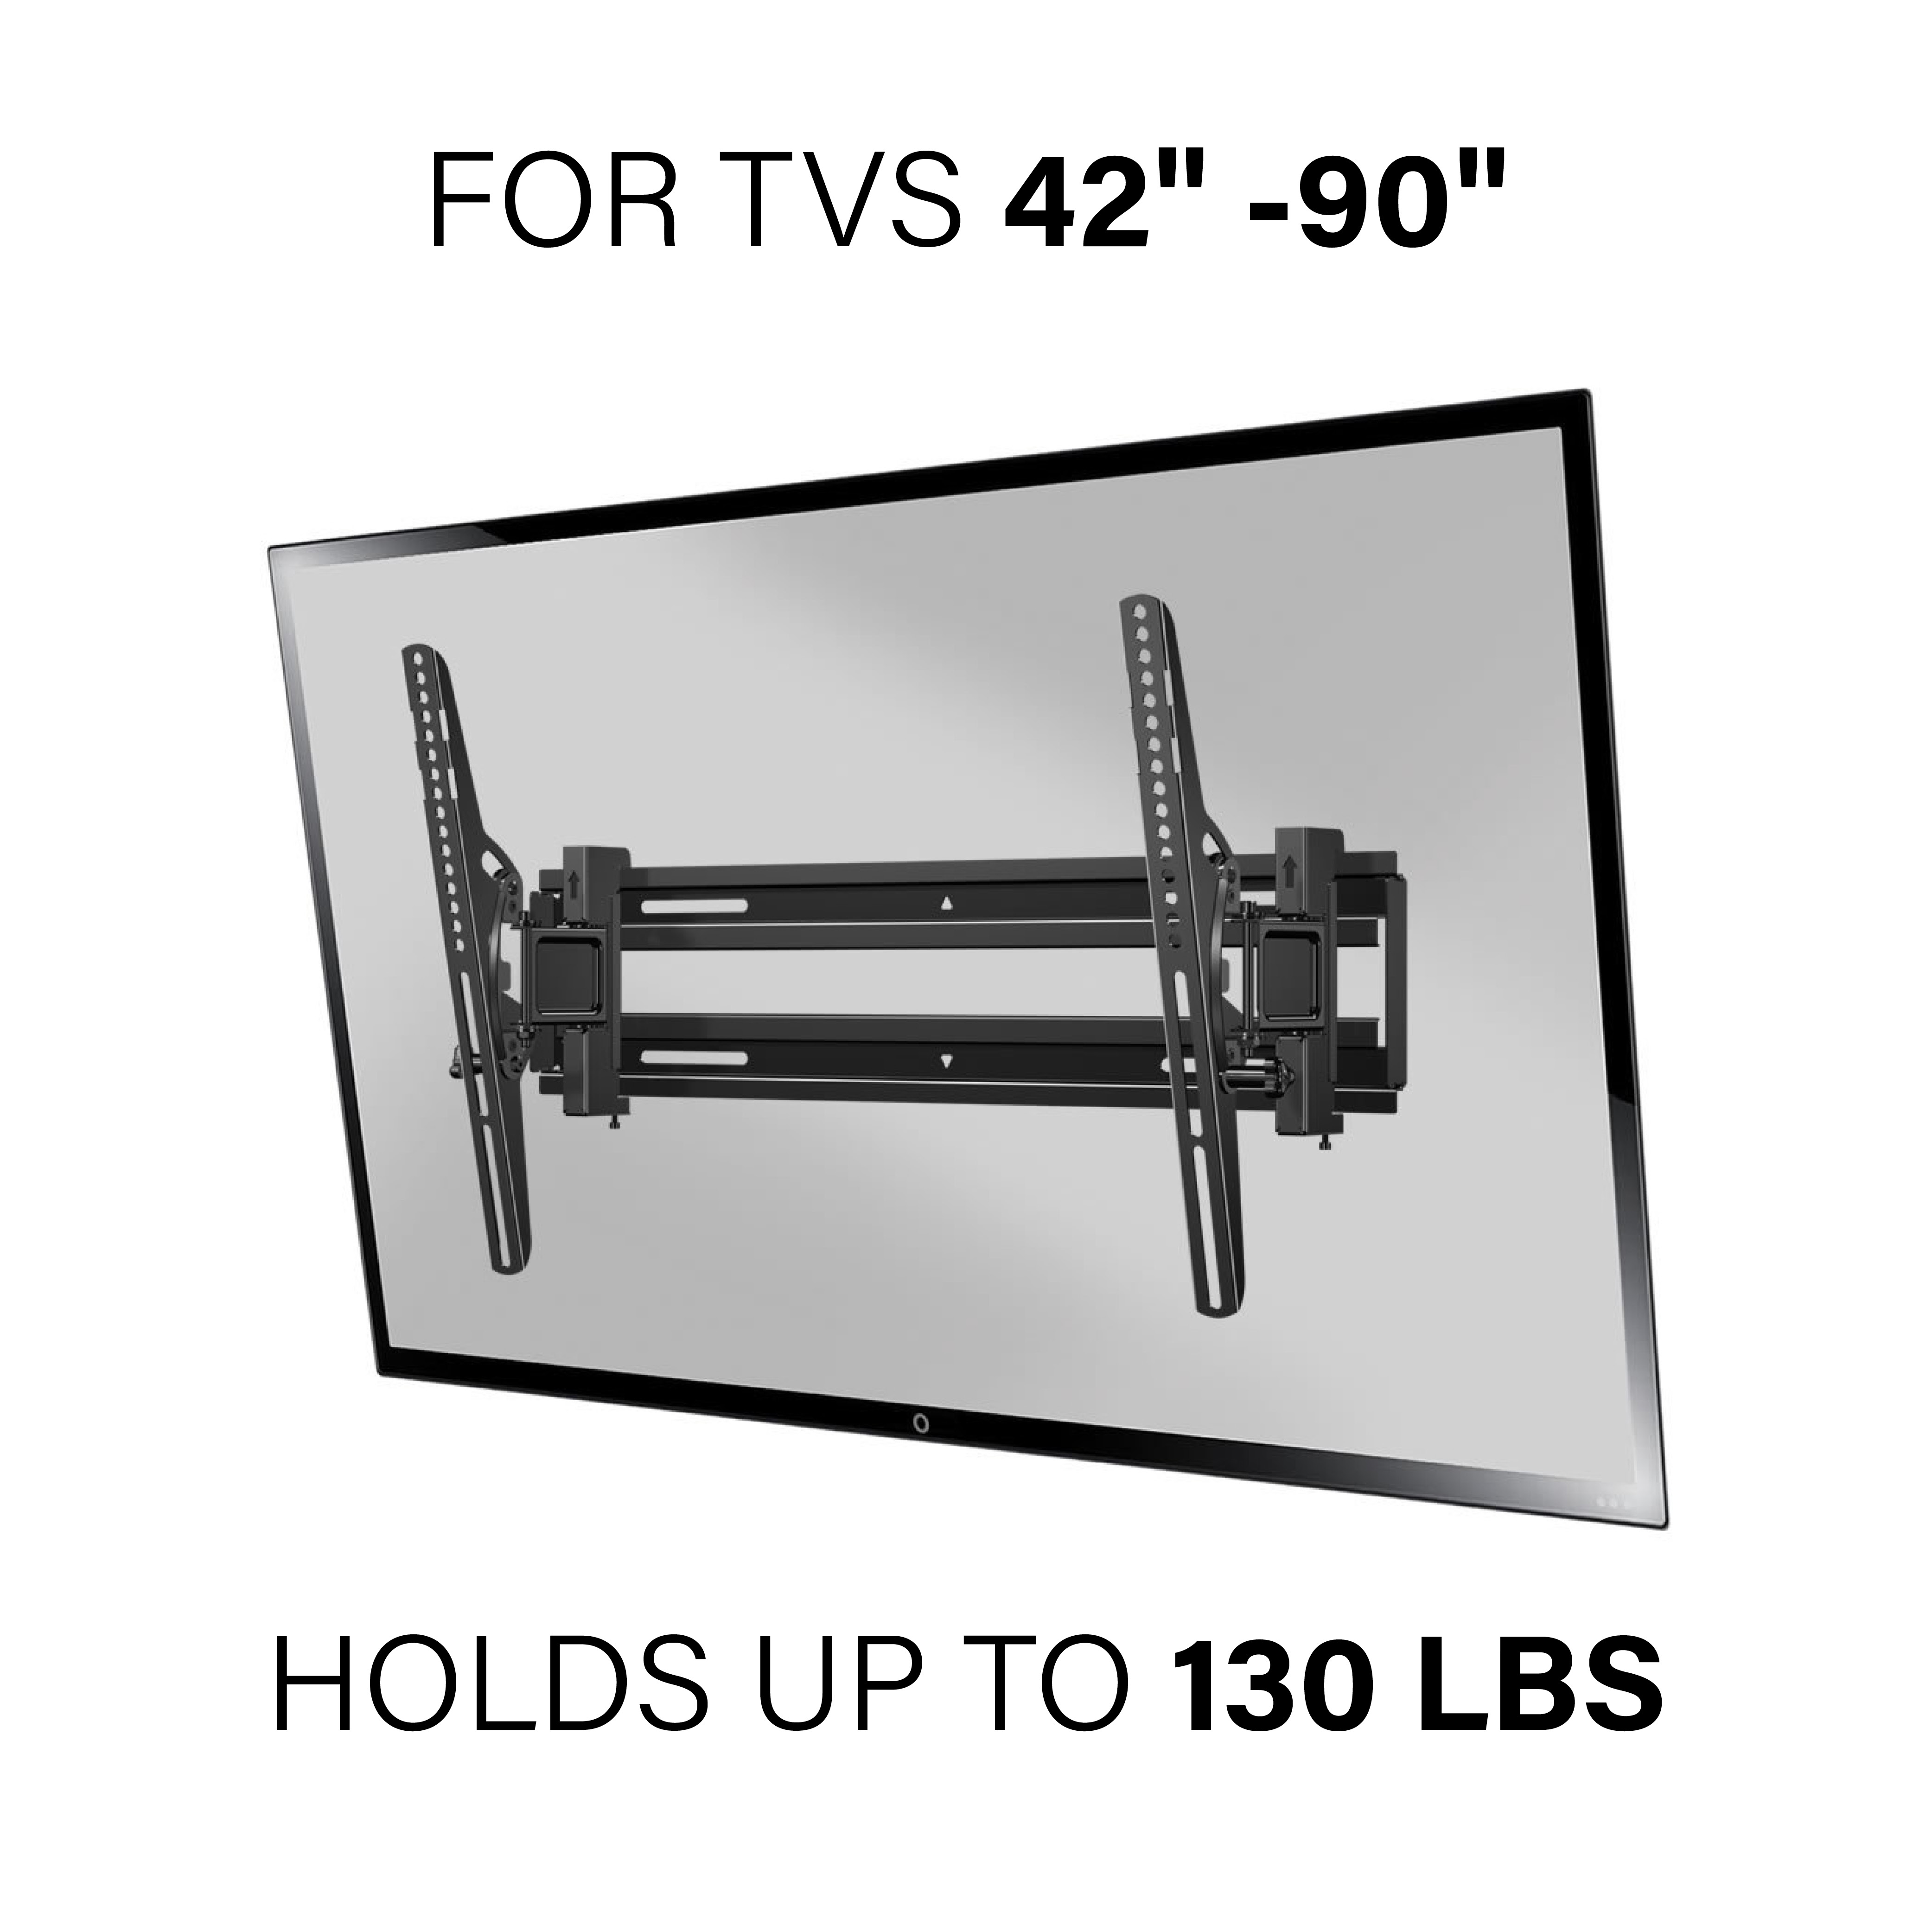 SANUS Vuepoint FLT1 Extend + Tilt TV Wall Mount for TVs 32"-70", Max Tilt and Easy Cable Access - image 4 of 9